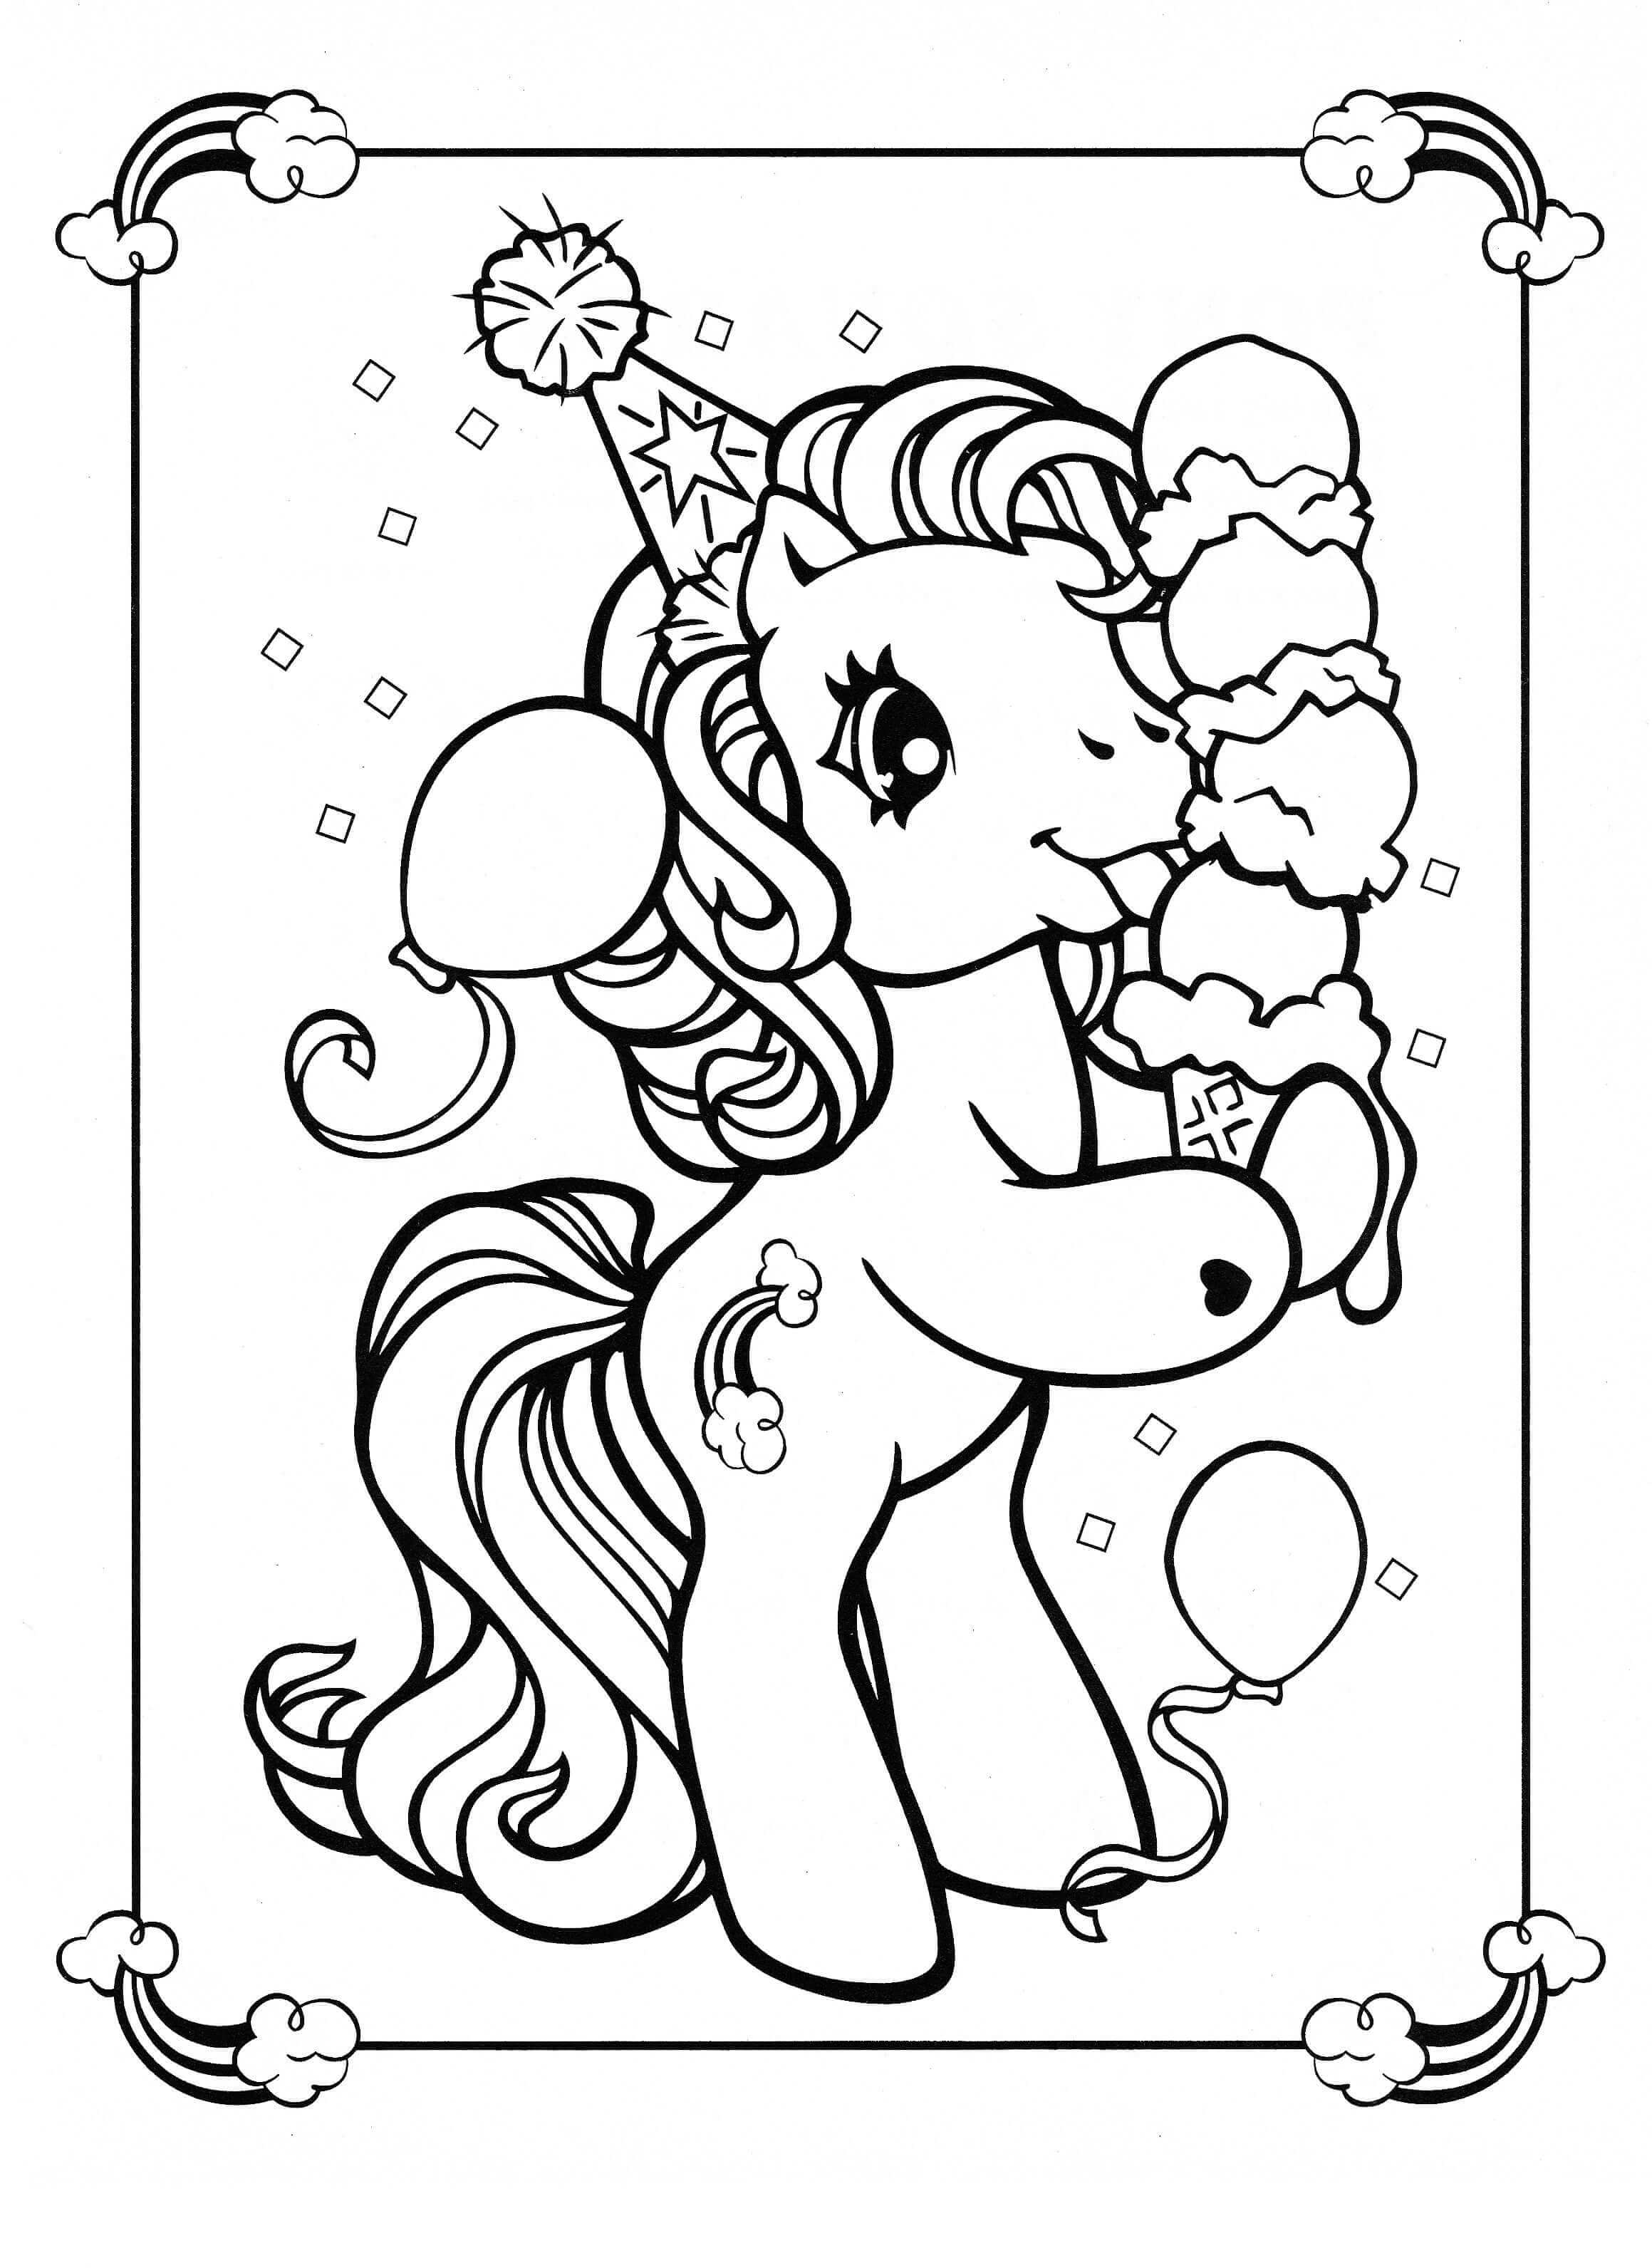 Retro Rainbow Dash Free Coloring Pages